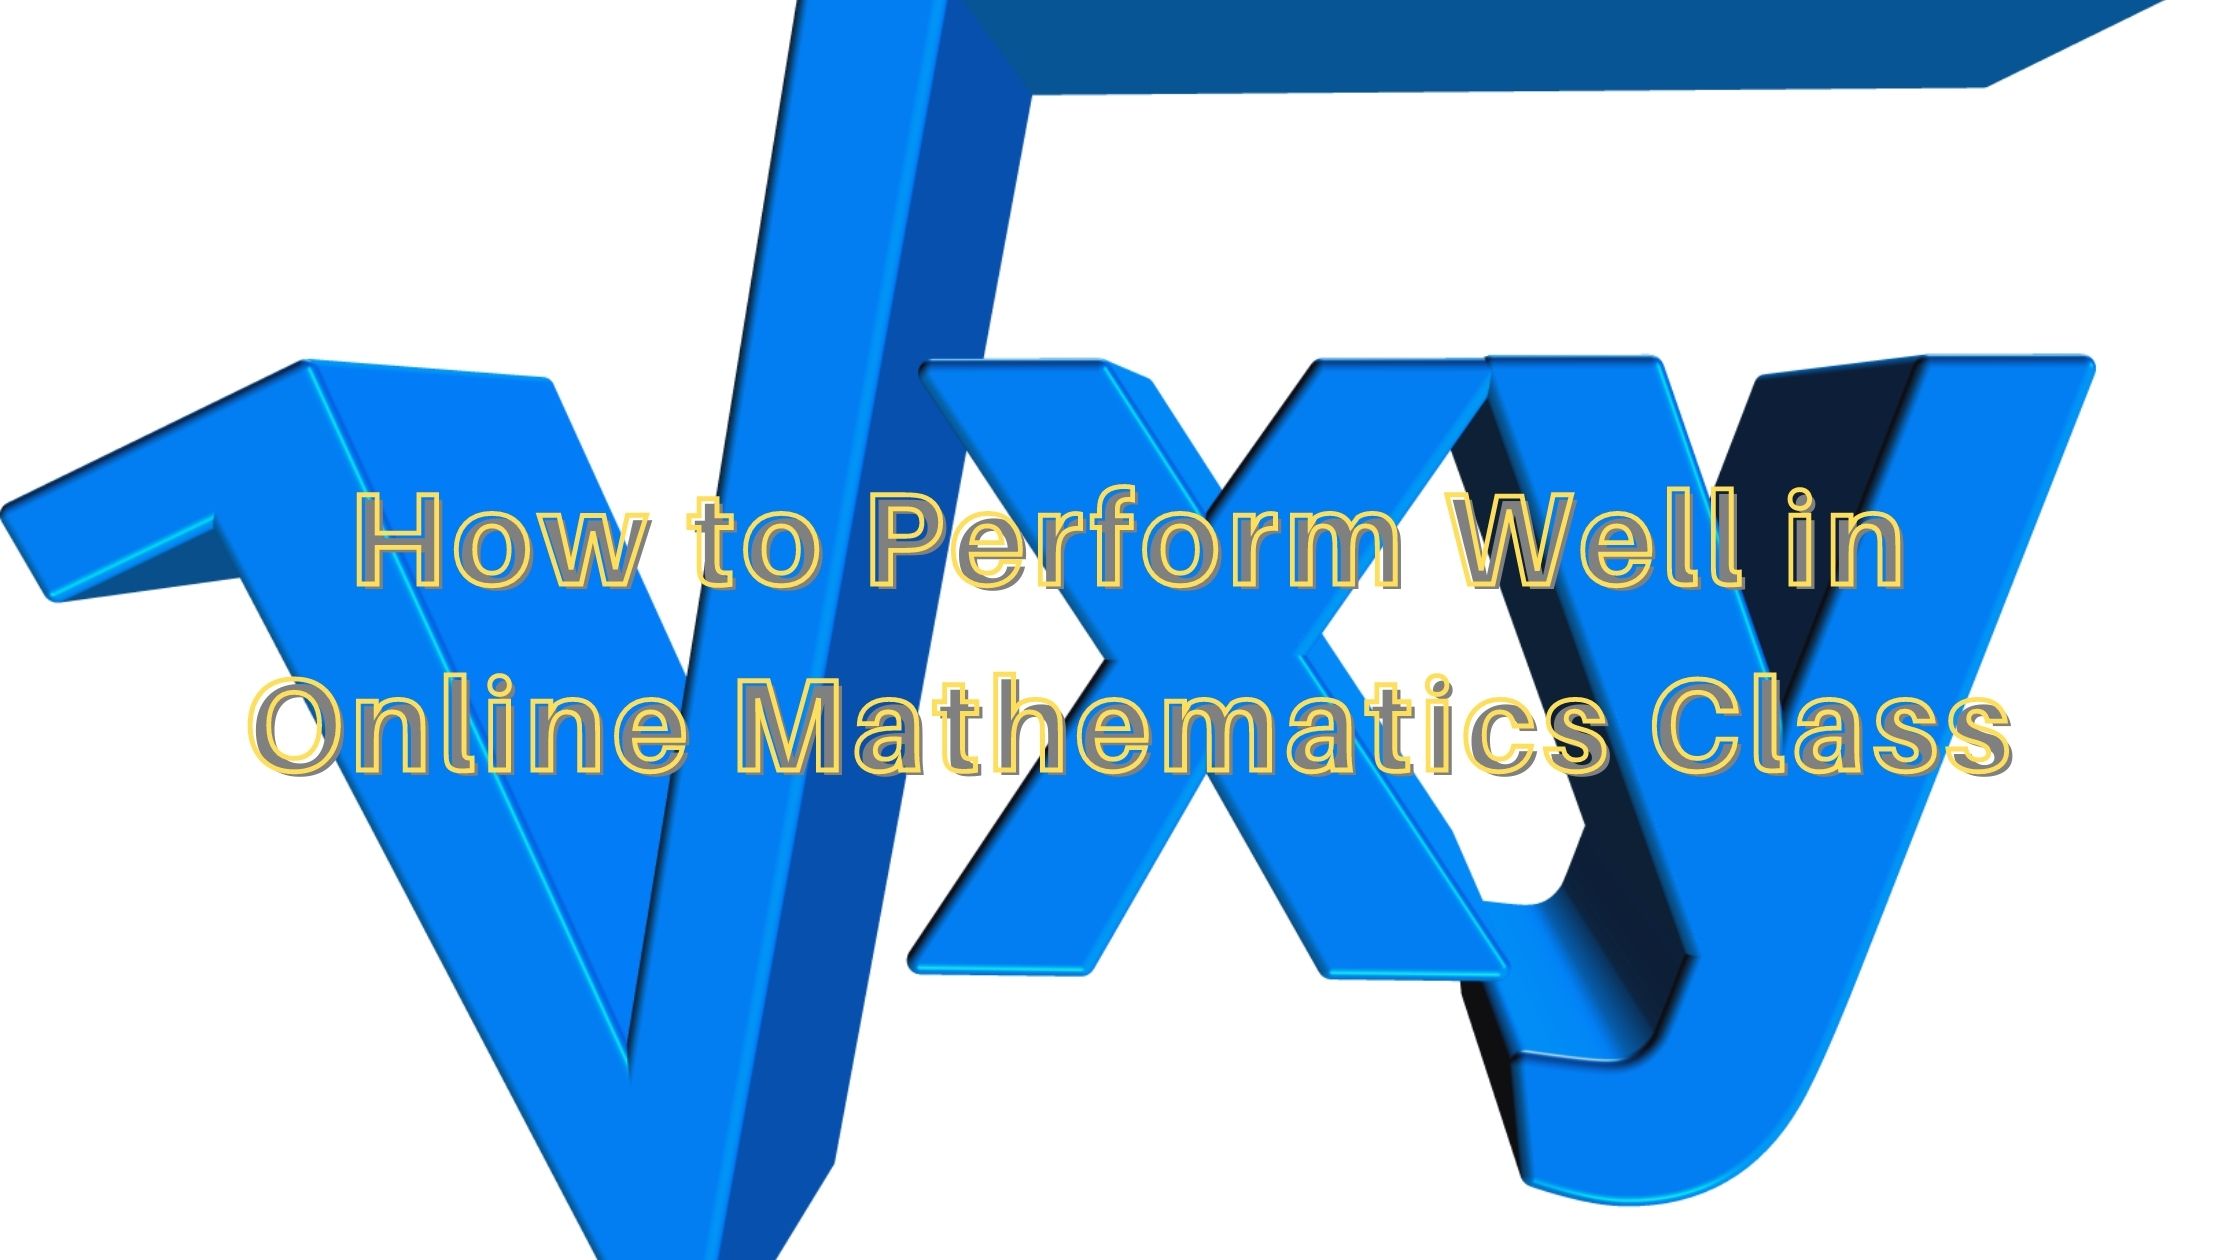 How to Perform Well in Online Mathematics Class